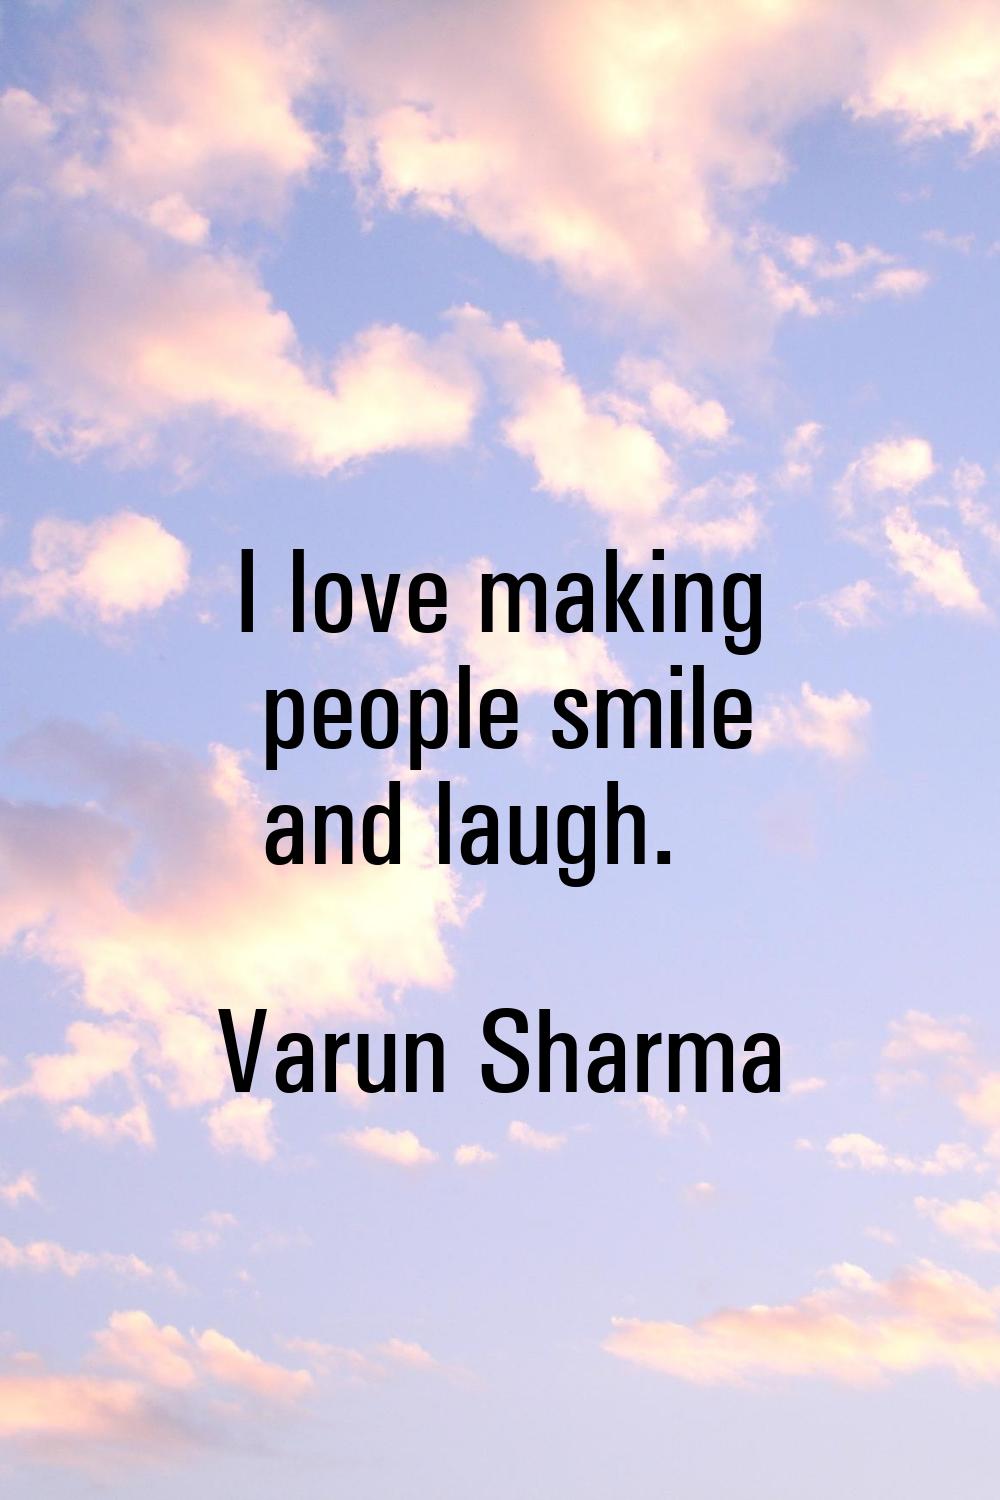 I love making people smile and laugh.